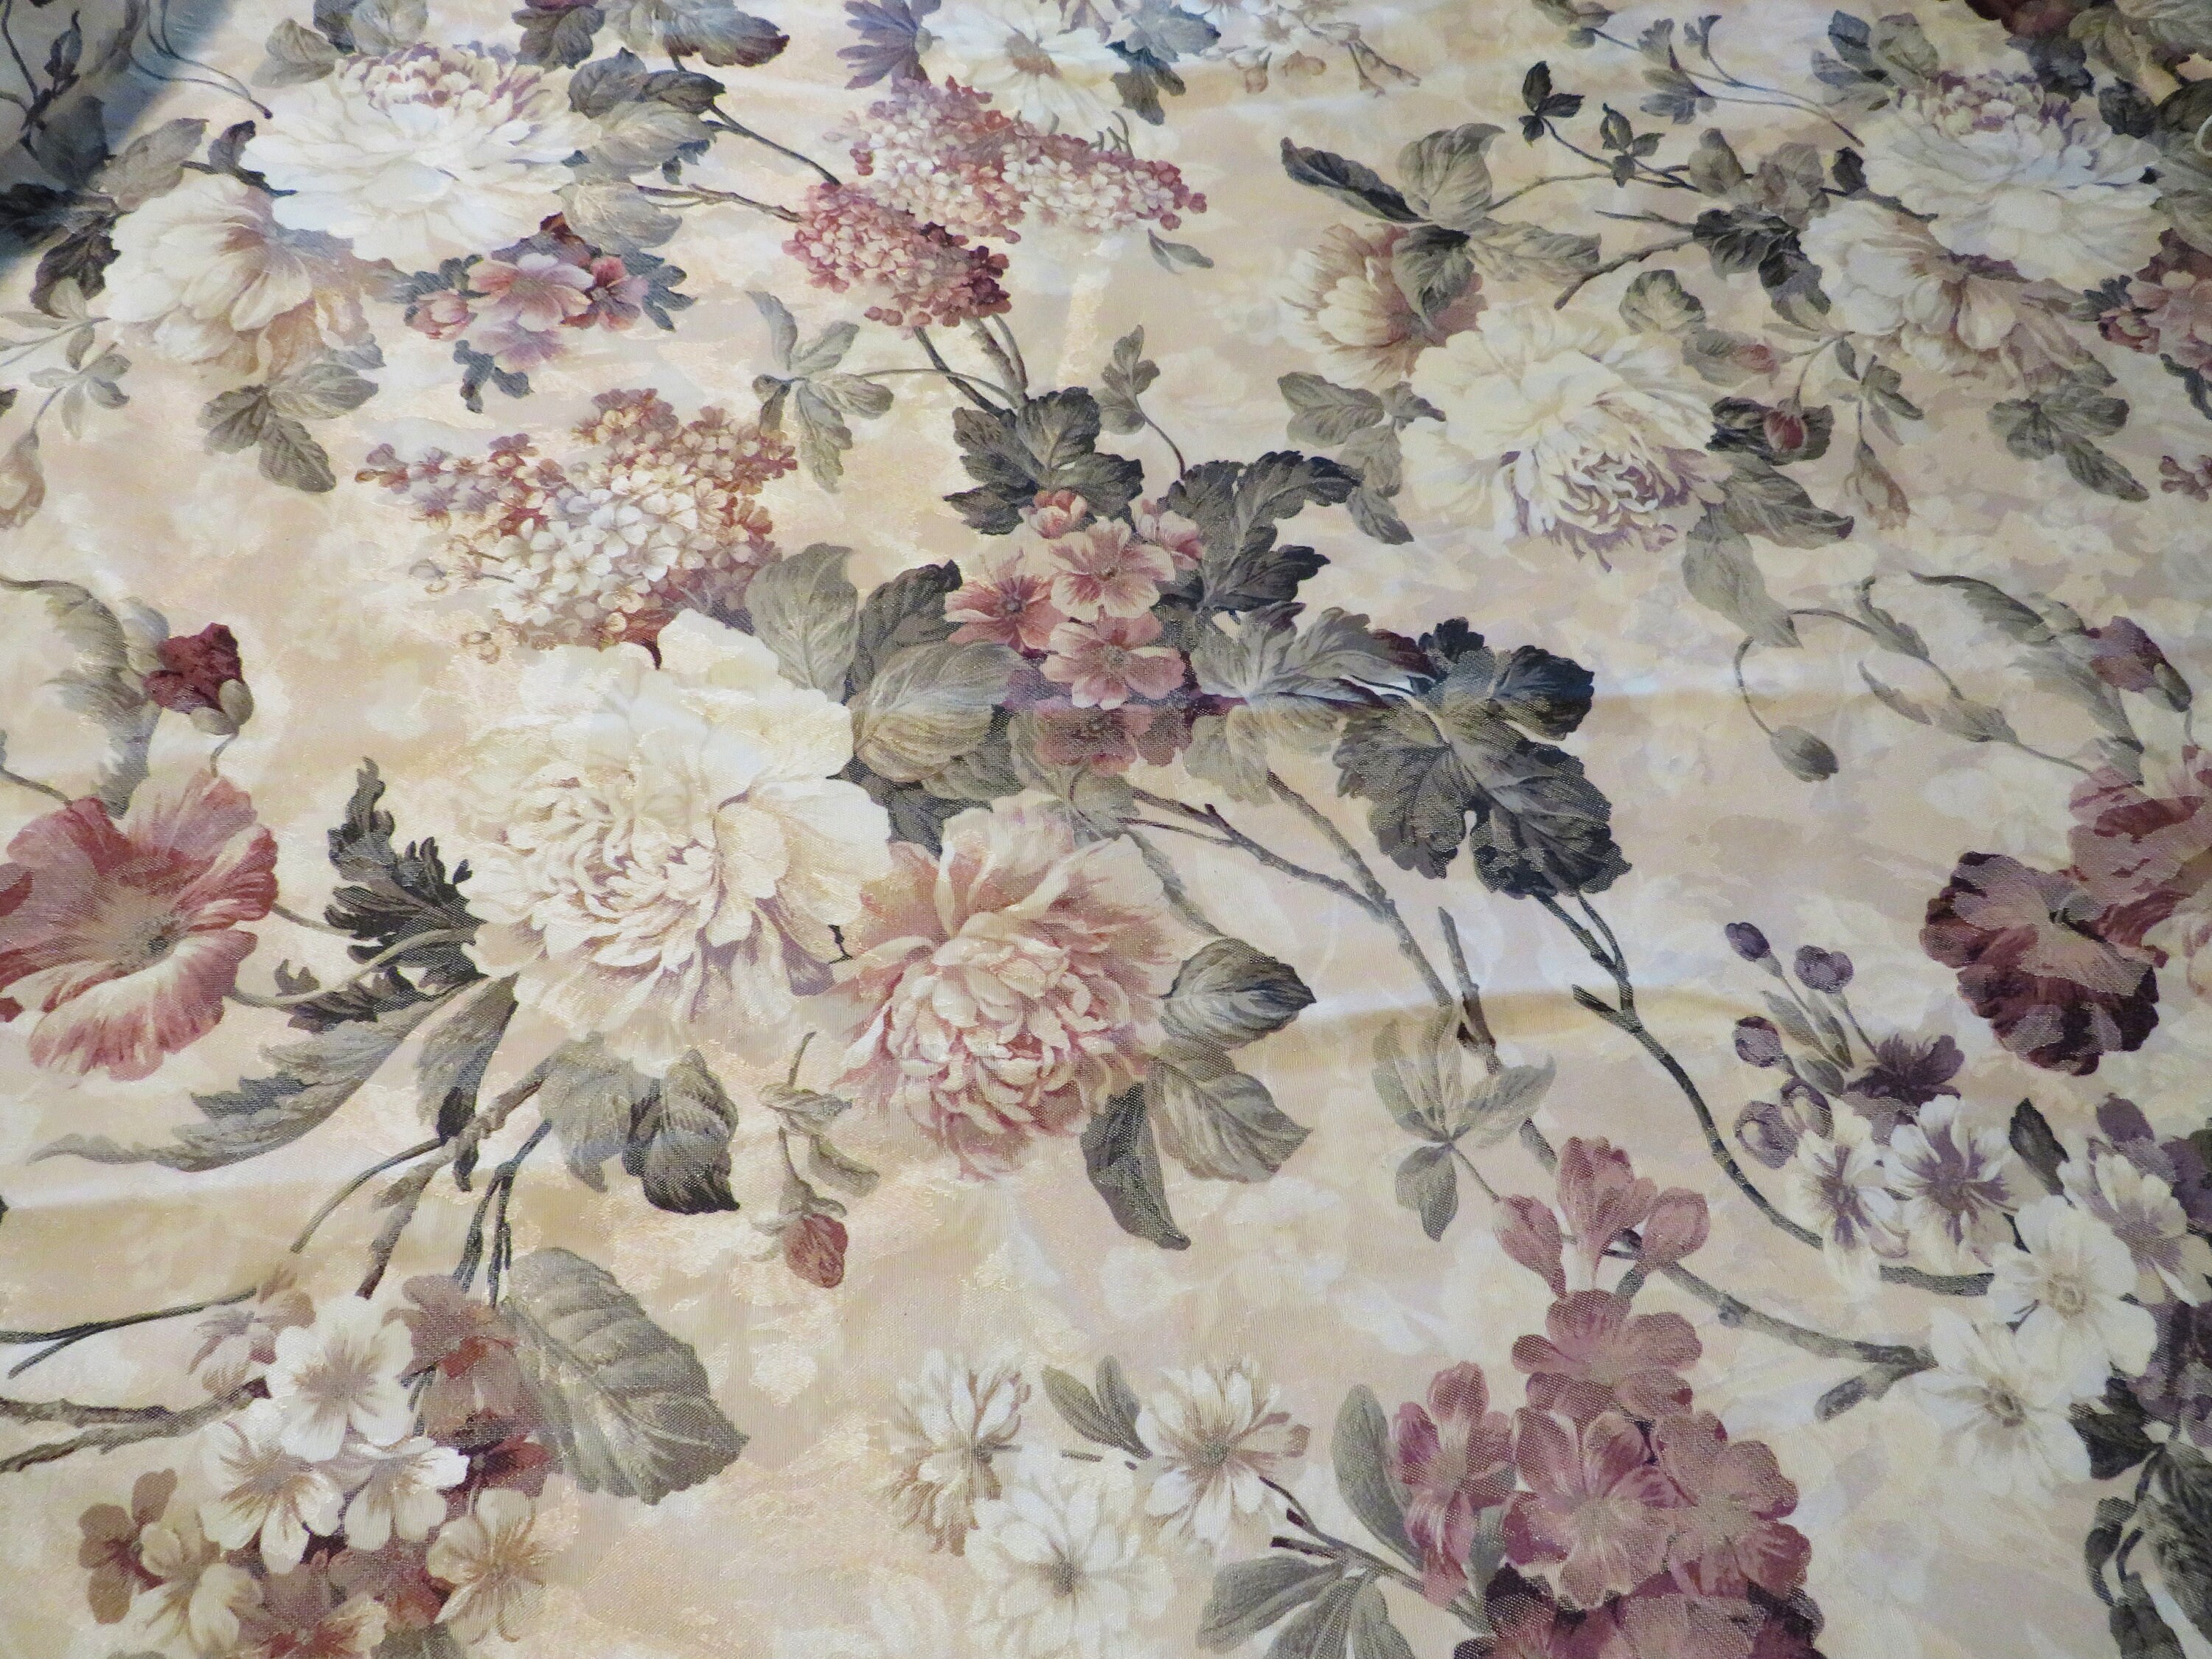 Tracey in Flora, Large Scale Floral in Citrus / Pink / Blue / Taupe, Richloom Home Decor / Drapery Fabric, Linen Blend, 54 Wide